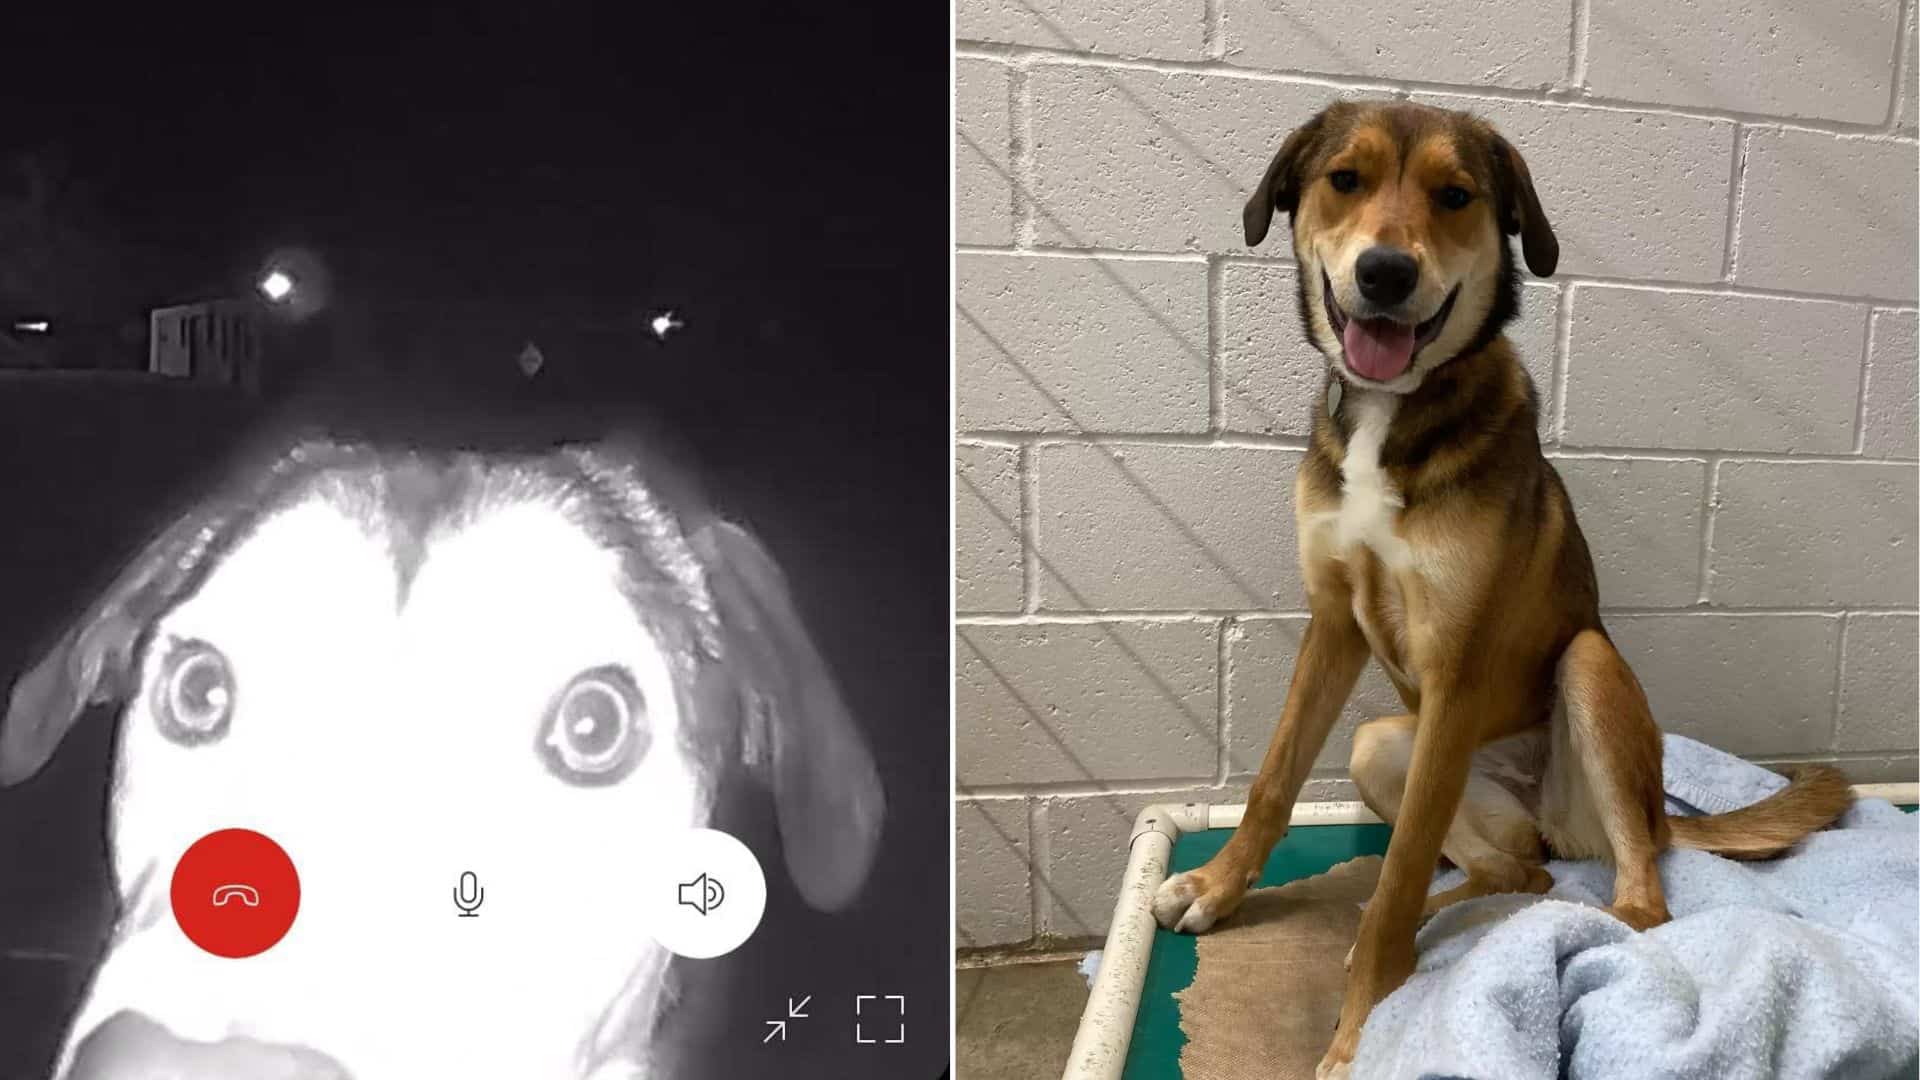 Shelter Workers Shocked As One Of Their Rescue Dog Rings Doorbell At 1 A.M.